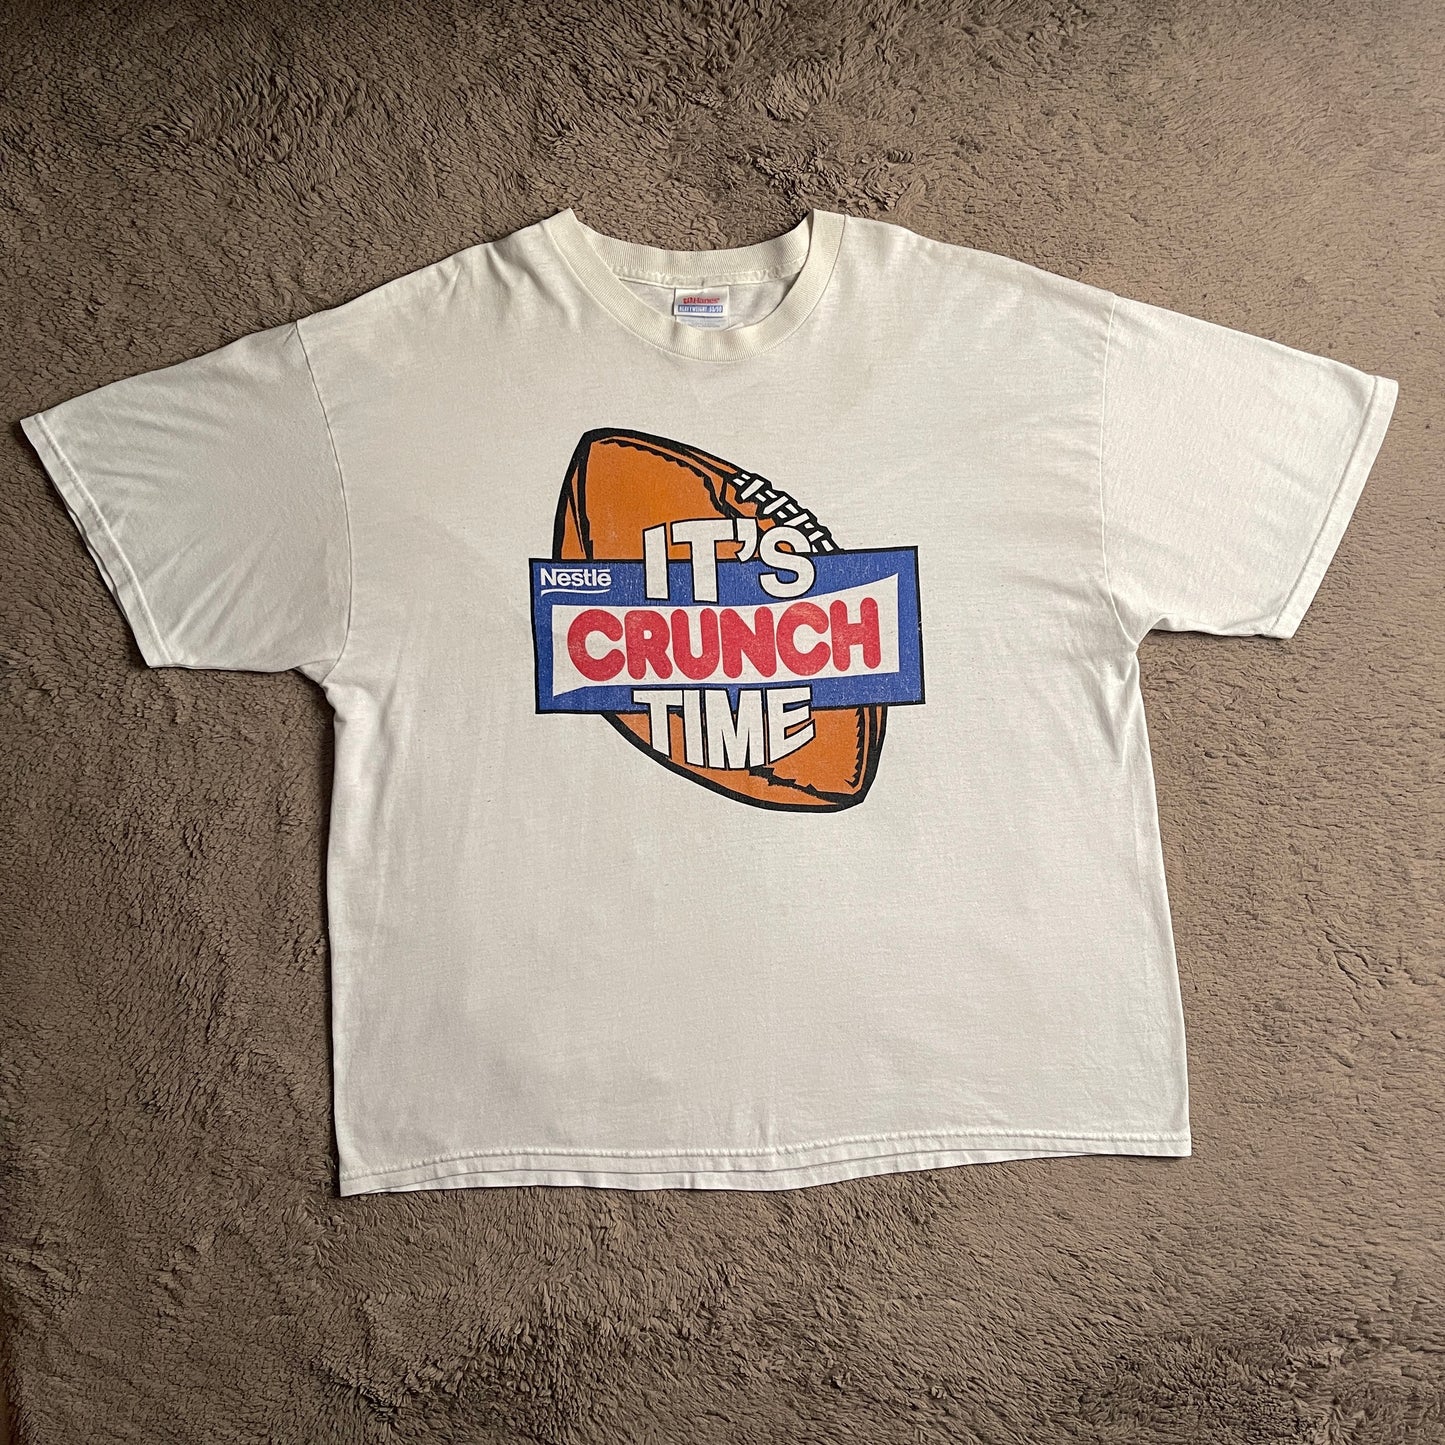 Nestle "It's Crunch Time" Tee (XL)